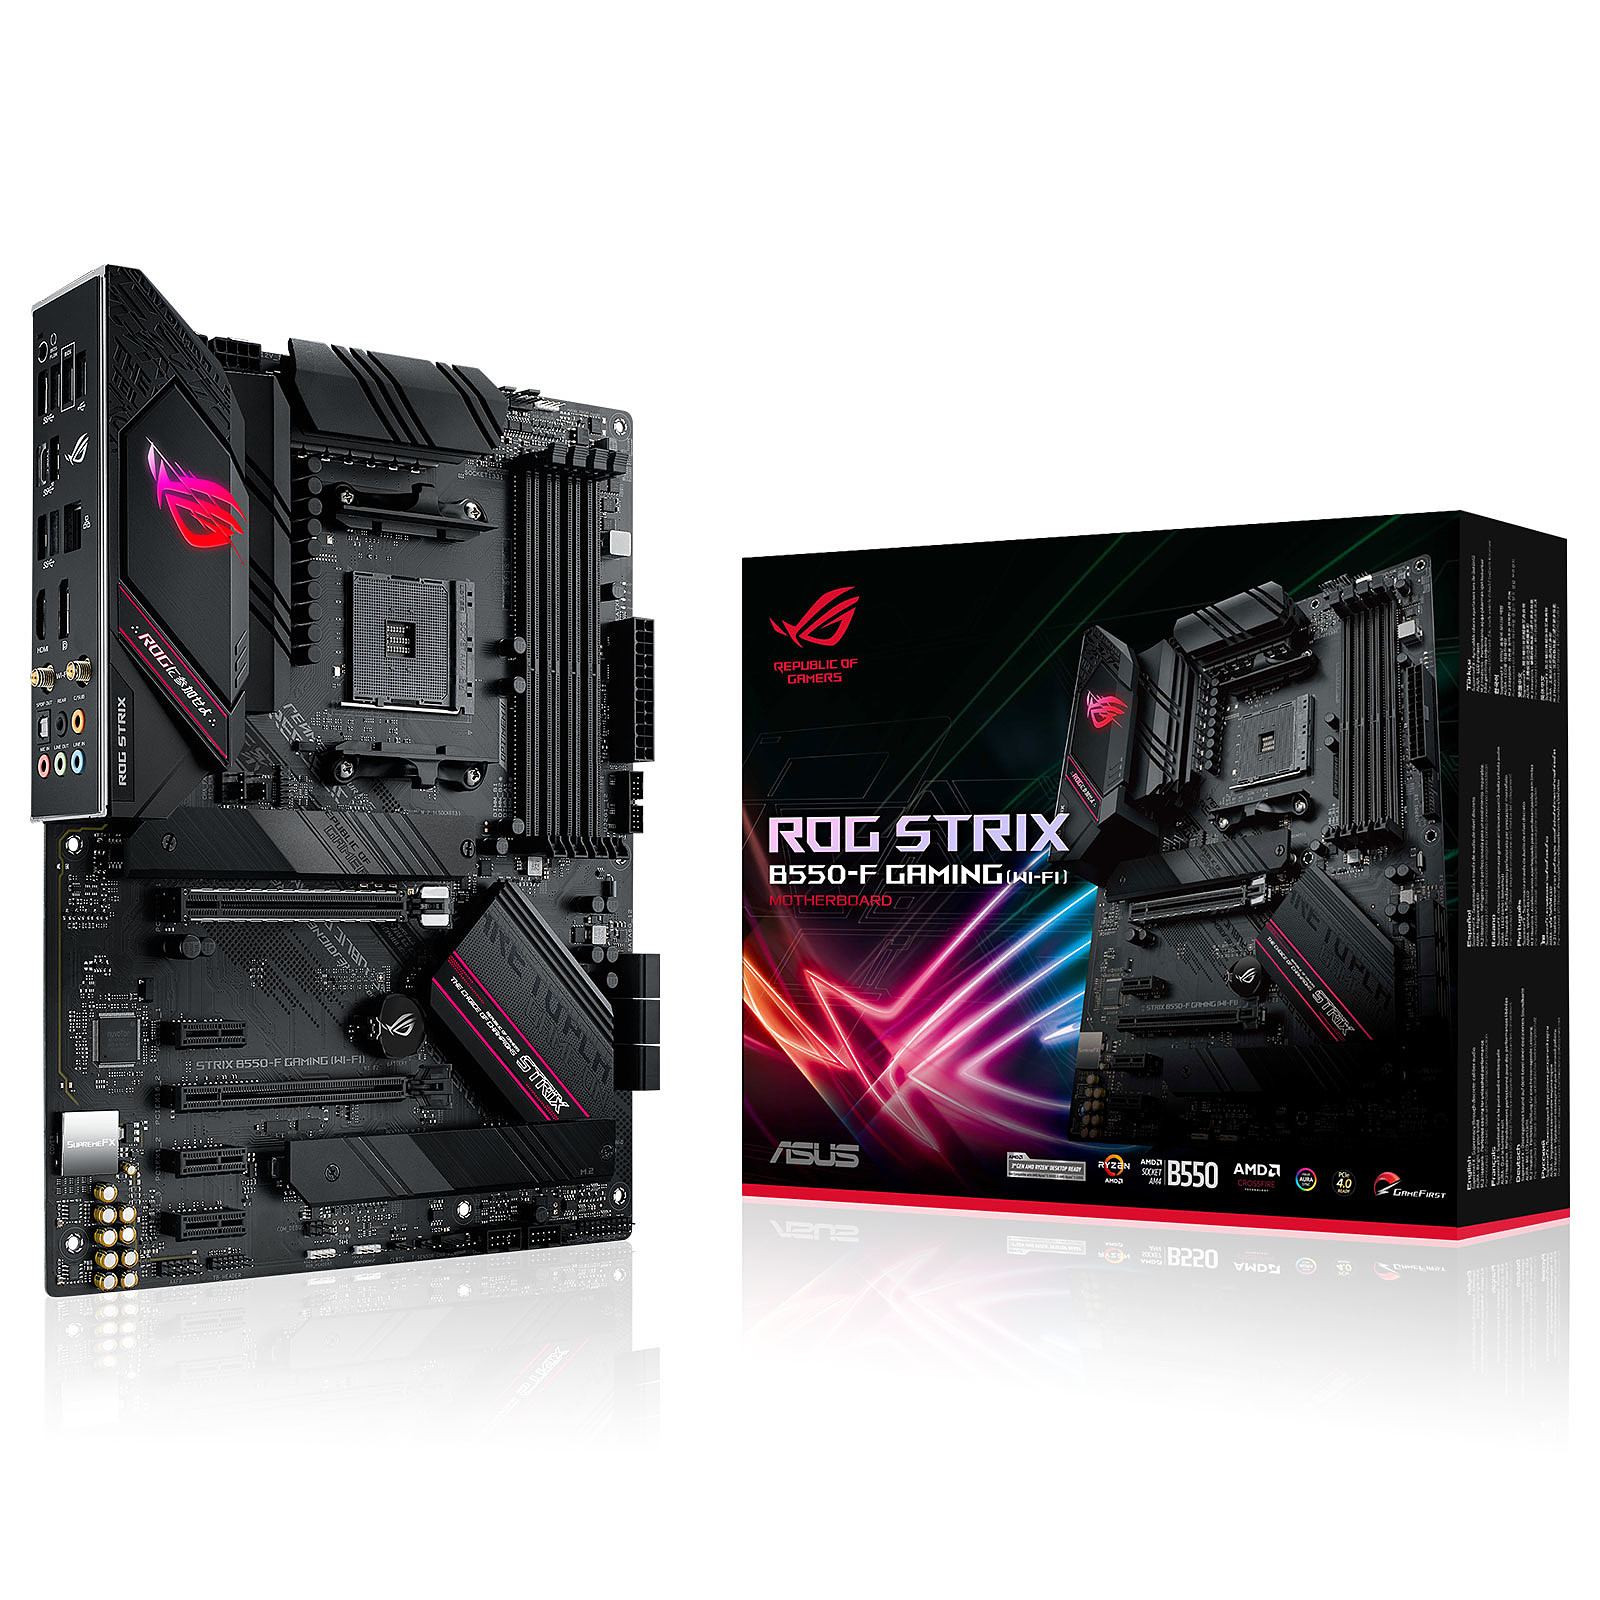 ASUS ROG STRIX B550-F GAMING (WI-FI) · Occasion - Carte mère ASUS - Occasion